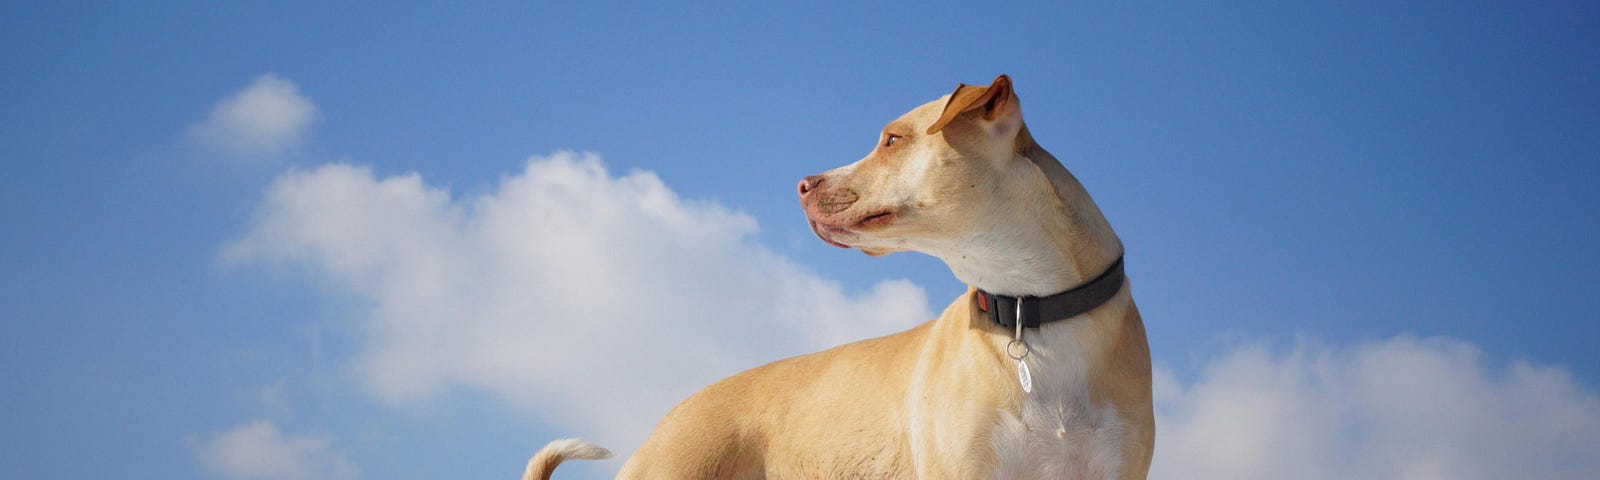 Image shows medium-sized tan dog wearing collar and standing on snowy landscape looking over his shoulder. Blue sky with clouds and mountains in background.